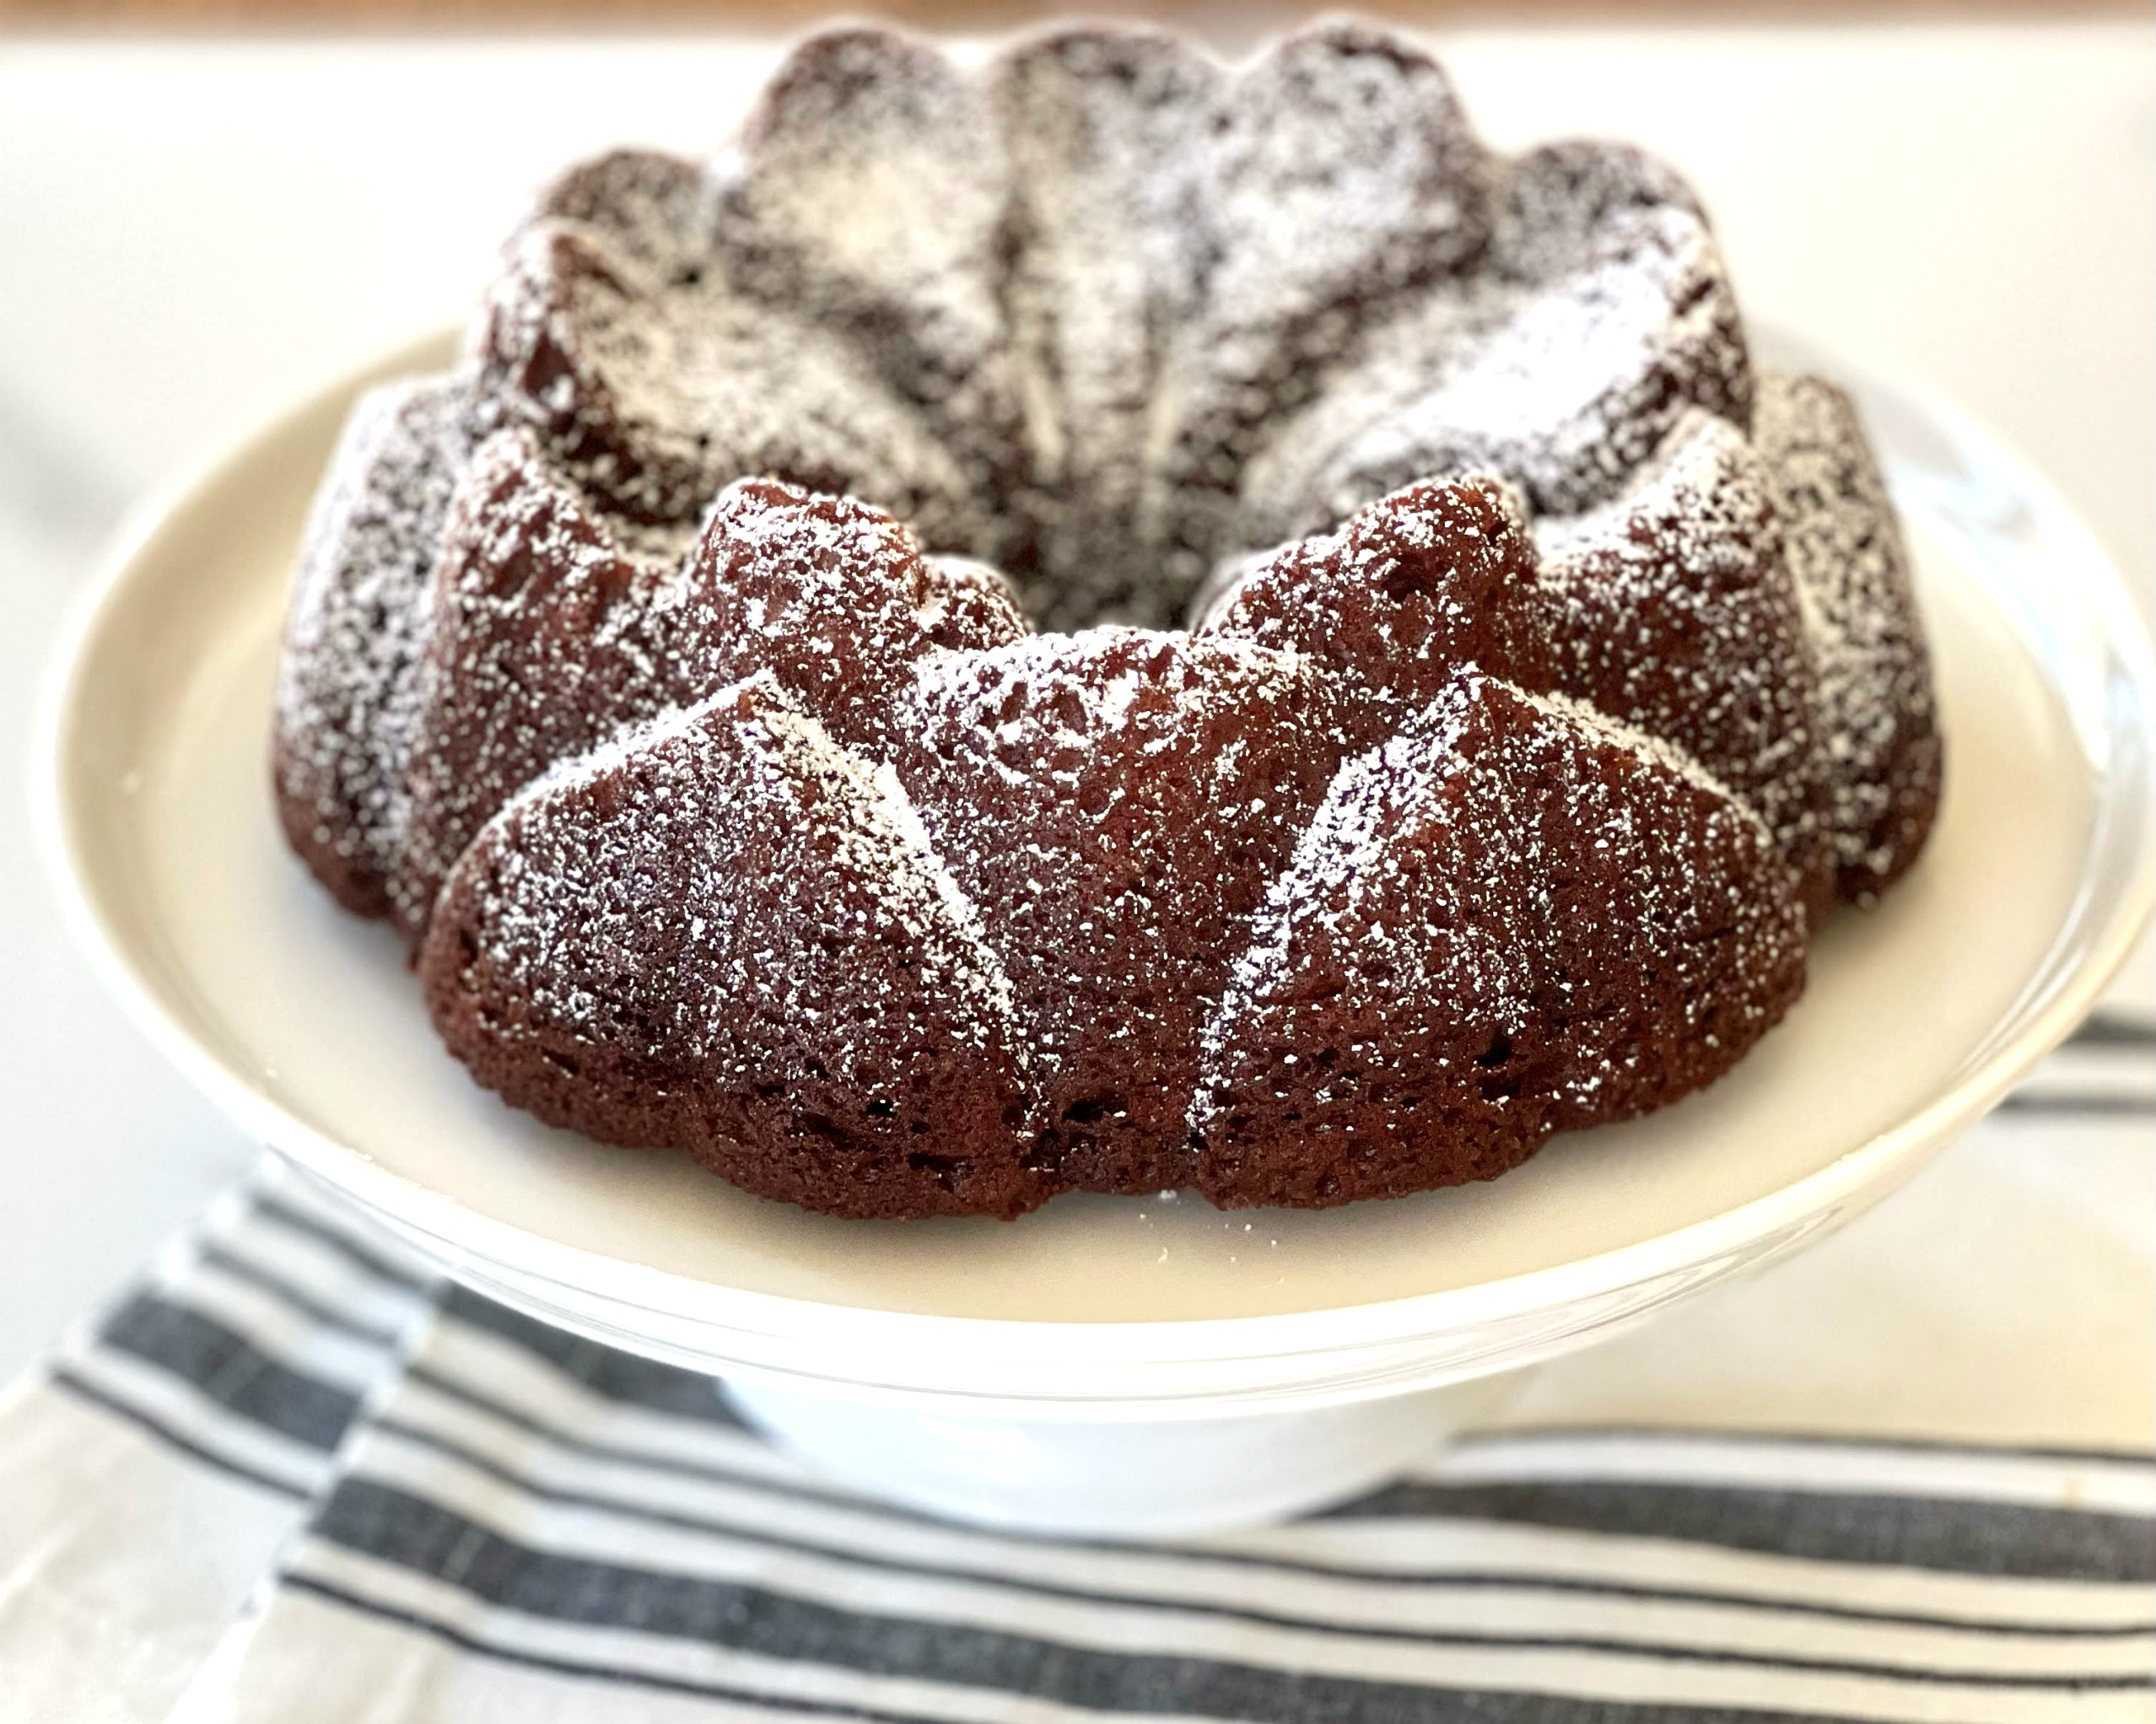 Why does the bottom of our homemade Bundt cakes stick in the pans and how  can we prevent it? - Quora